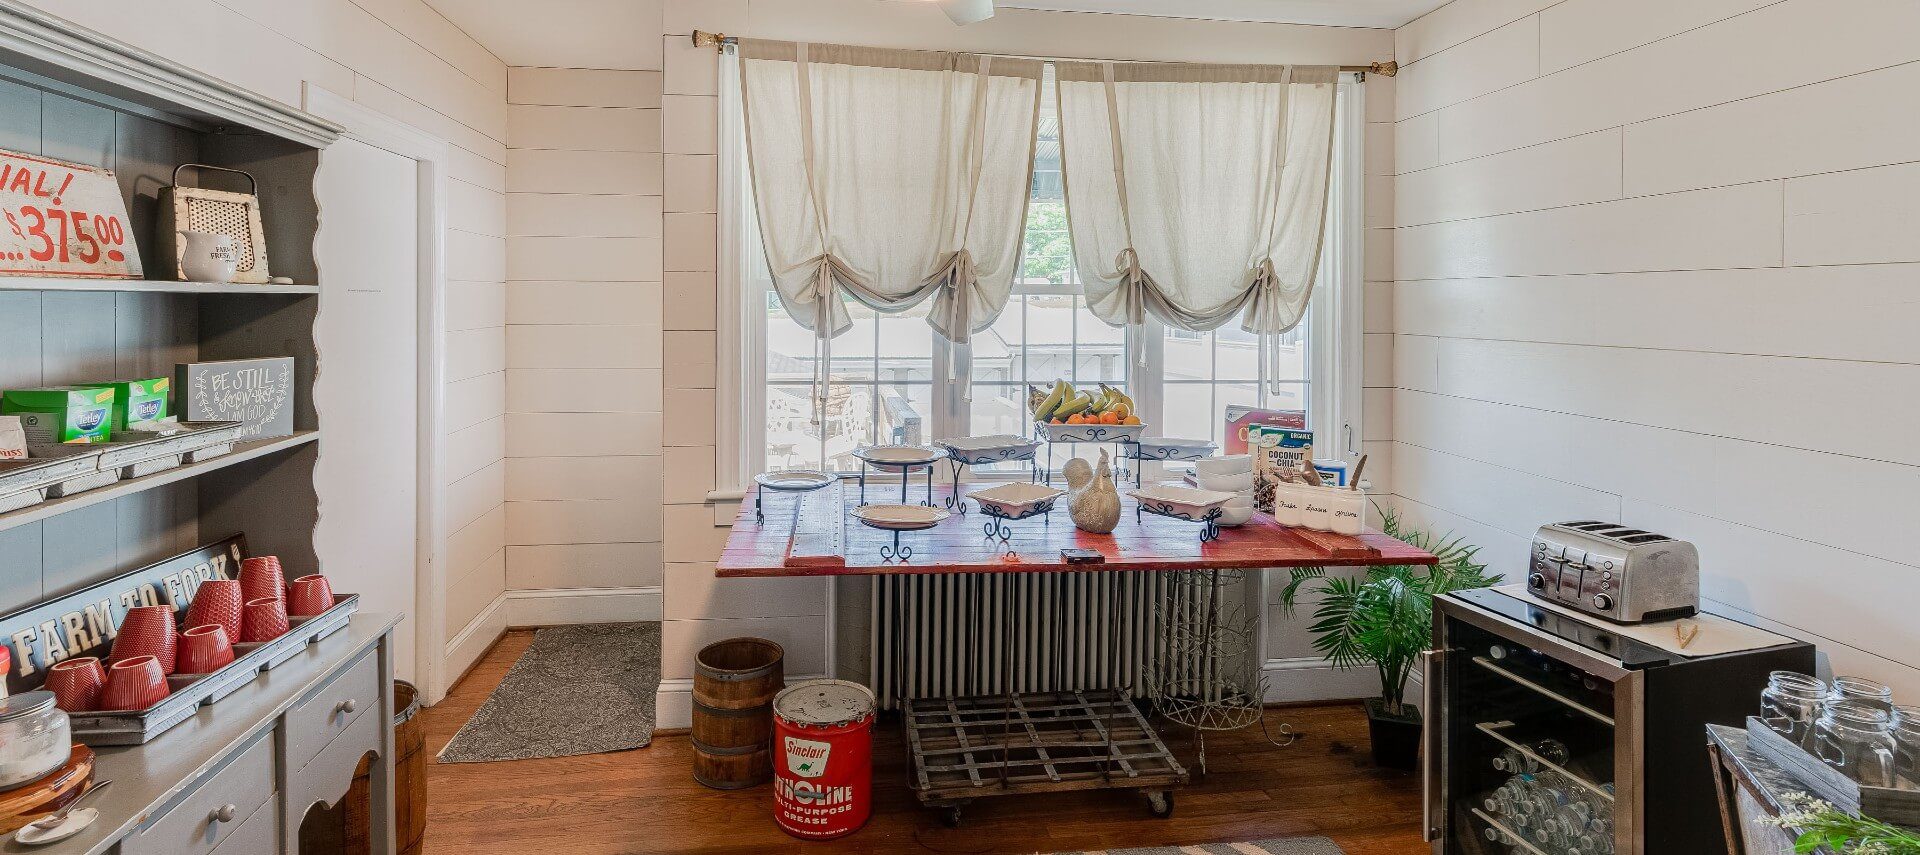 Dining area with white shiplap, table with buffet dishes and hutch with coffee mugs